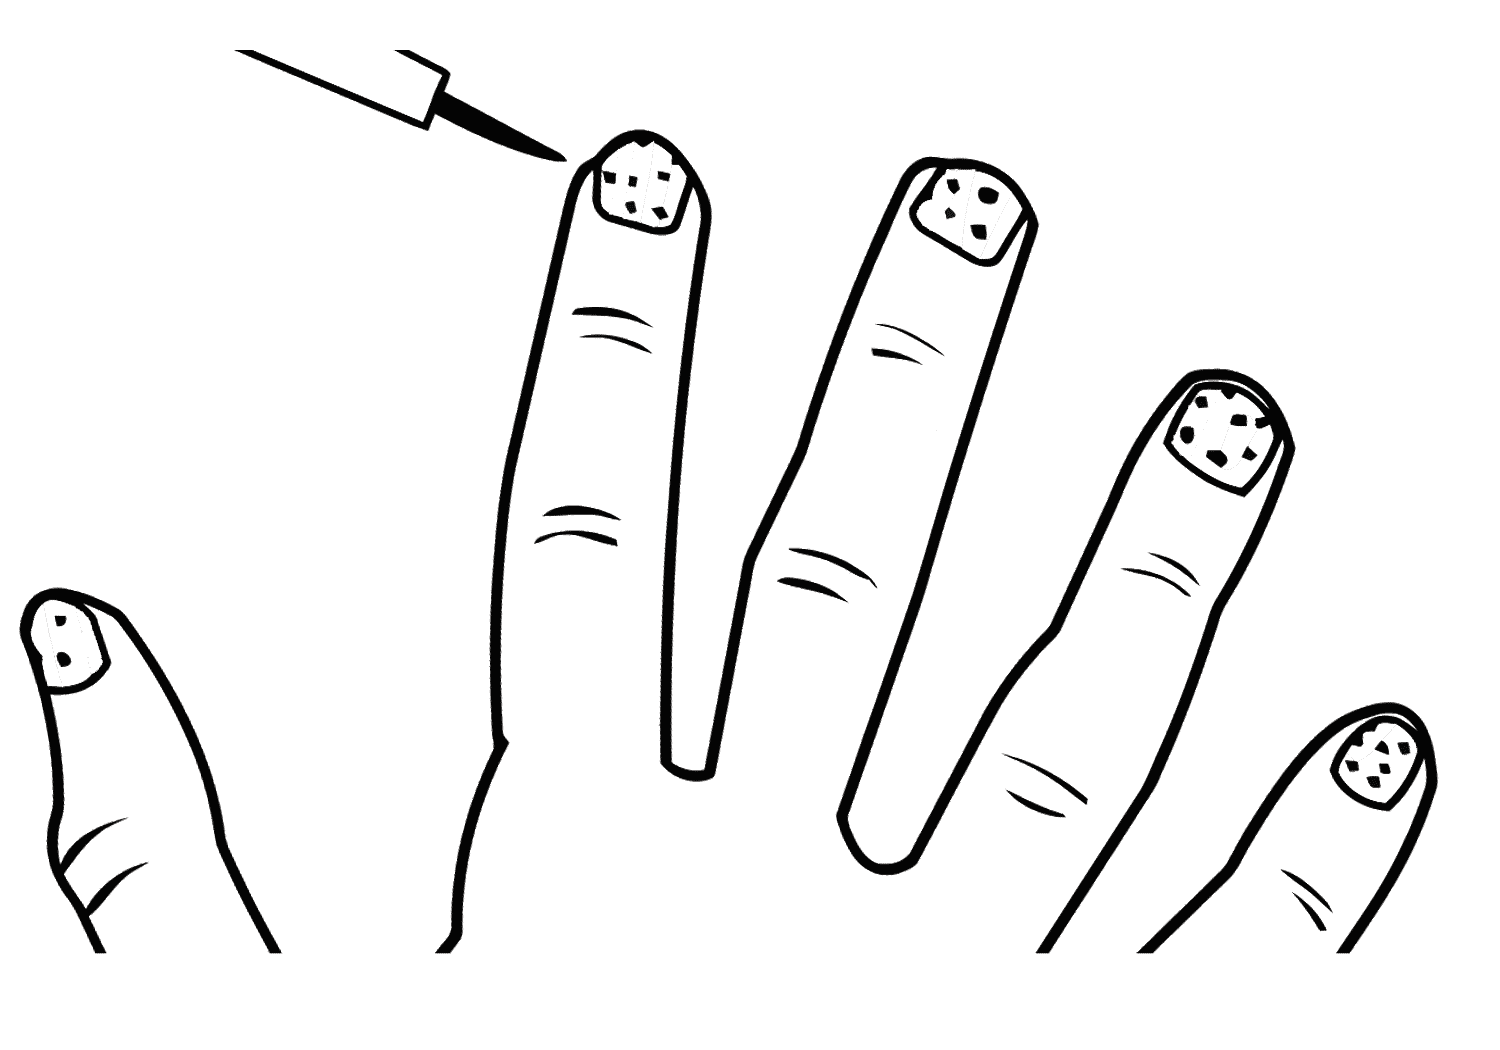 Coloring Activities for Kids with Long Nails - wide 3